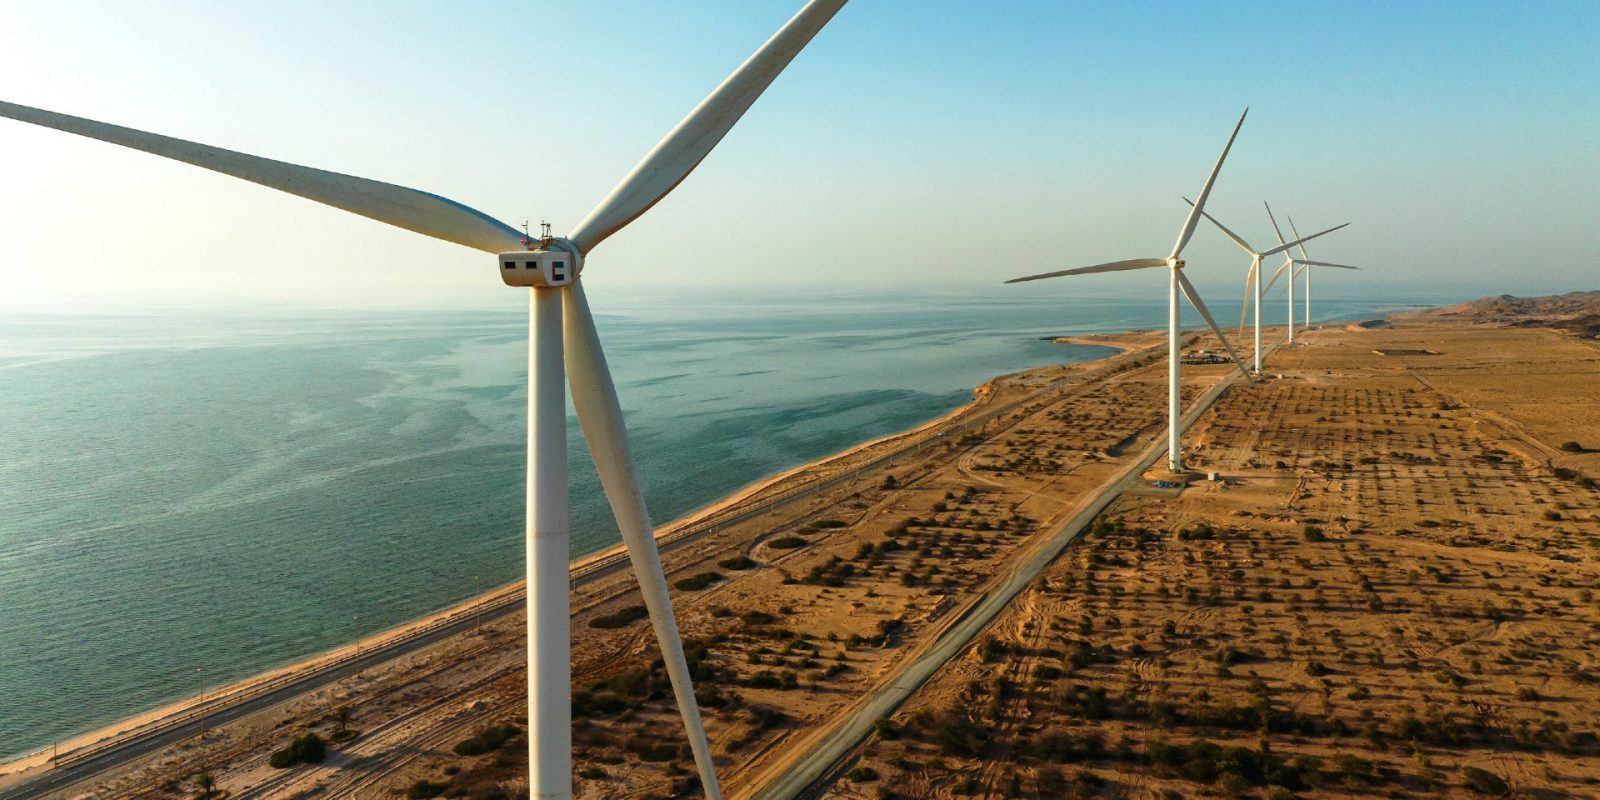 UAE wind project